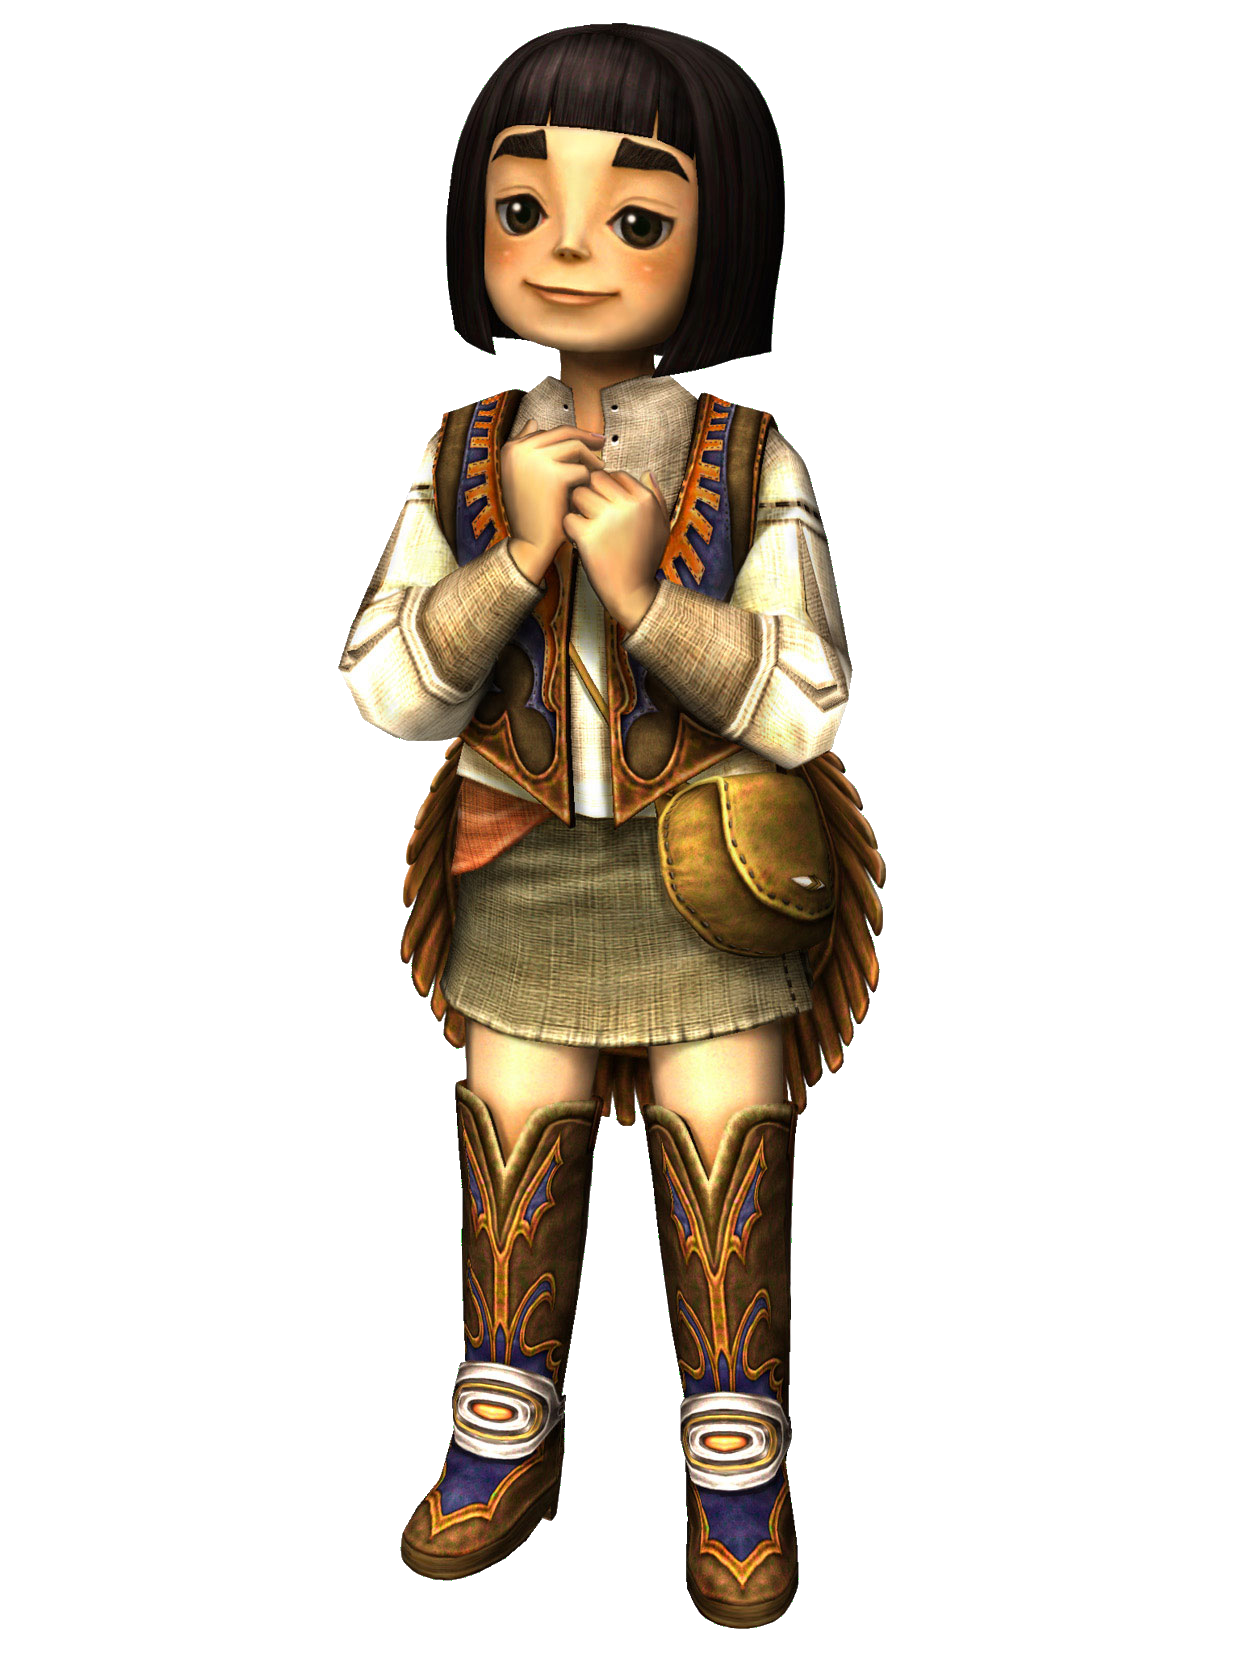 Image - Agitha.png - Hyrule Total War Wiki